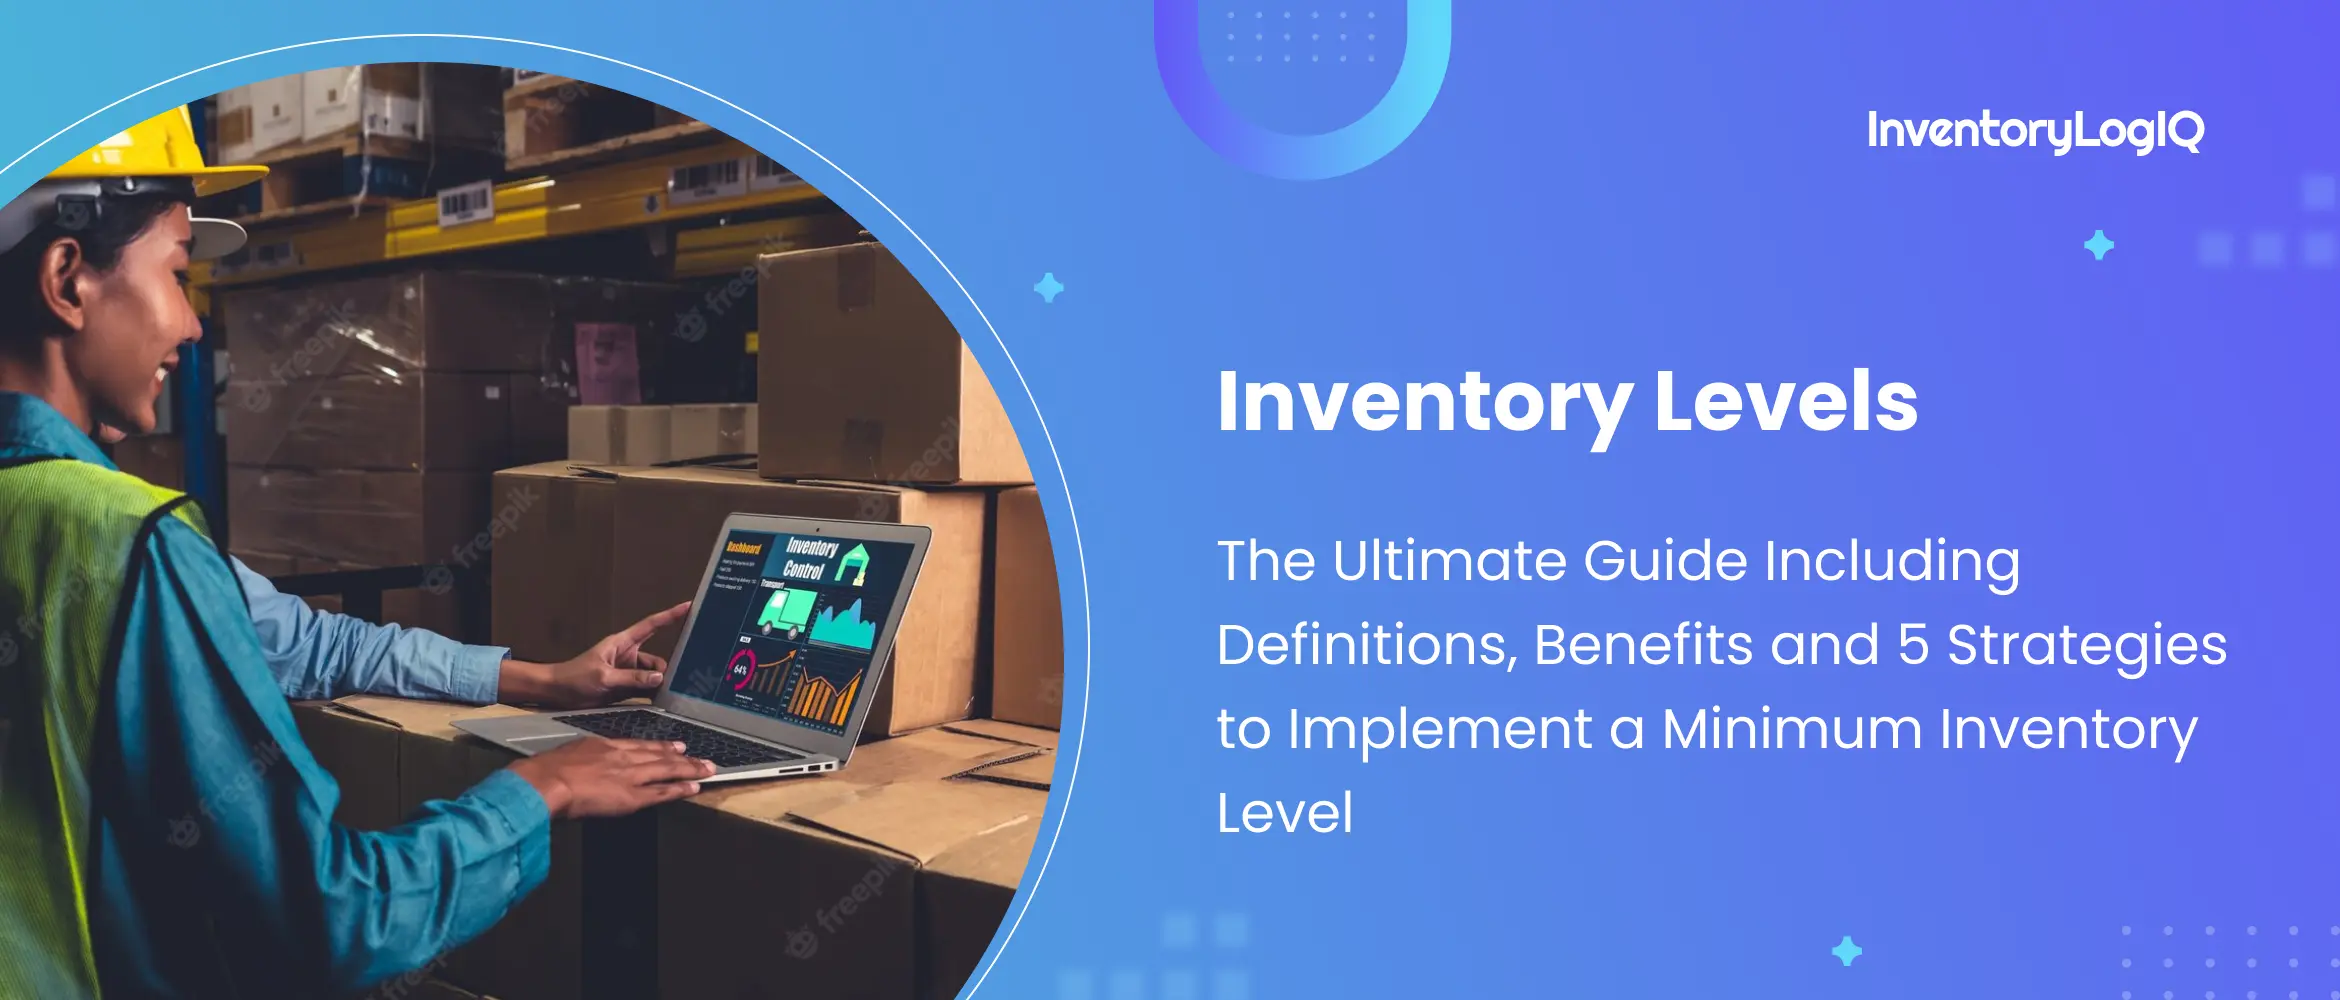 Inventory Level: ￼￼The Ultimate Guide Including Definitions, Benefits and 5 Strategies to Implement a Minimum Inventory Level in 2023